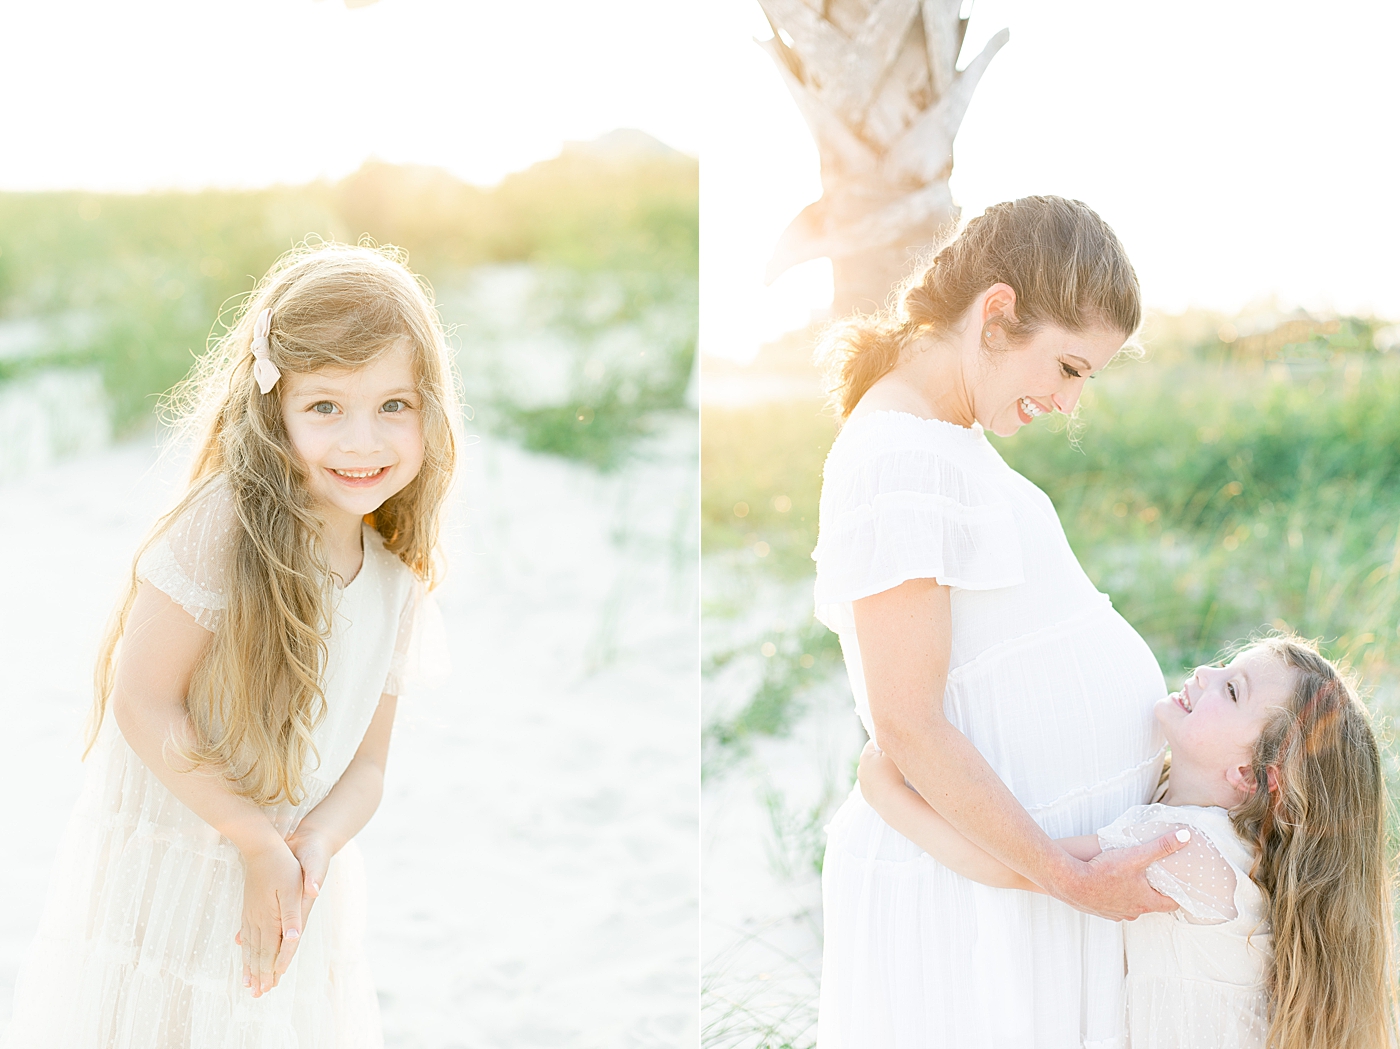 Mom and daughter at ocean springs maternity session. Photo by Little Sunshine Photography.